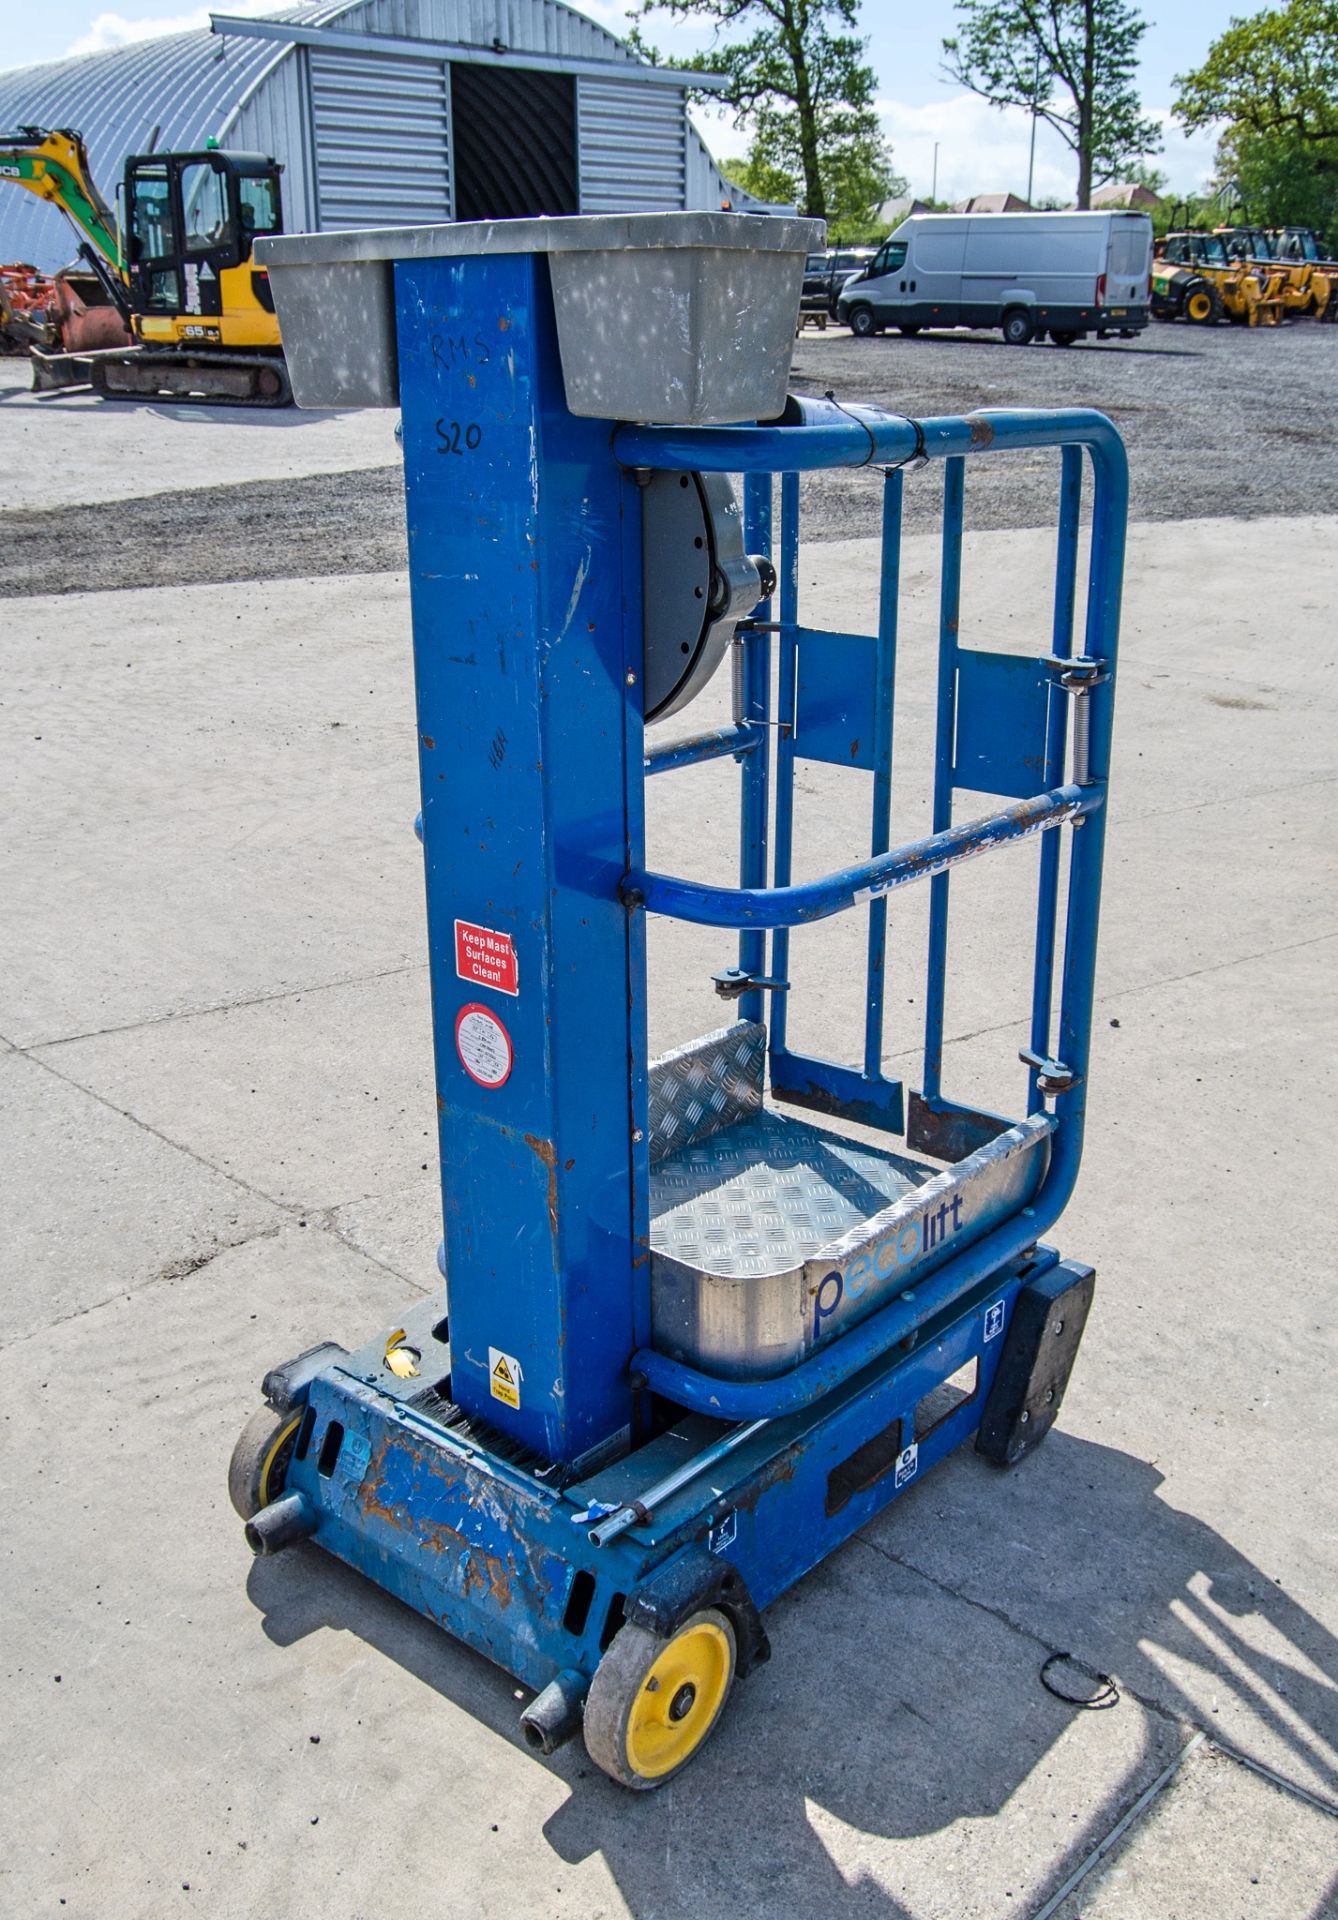 Power Towers Pecolift manual vertical mast access platform HYP272 - Image 2 of 3